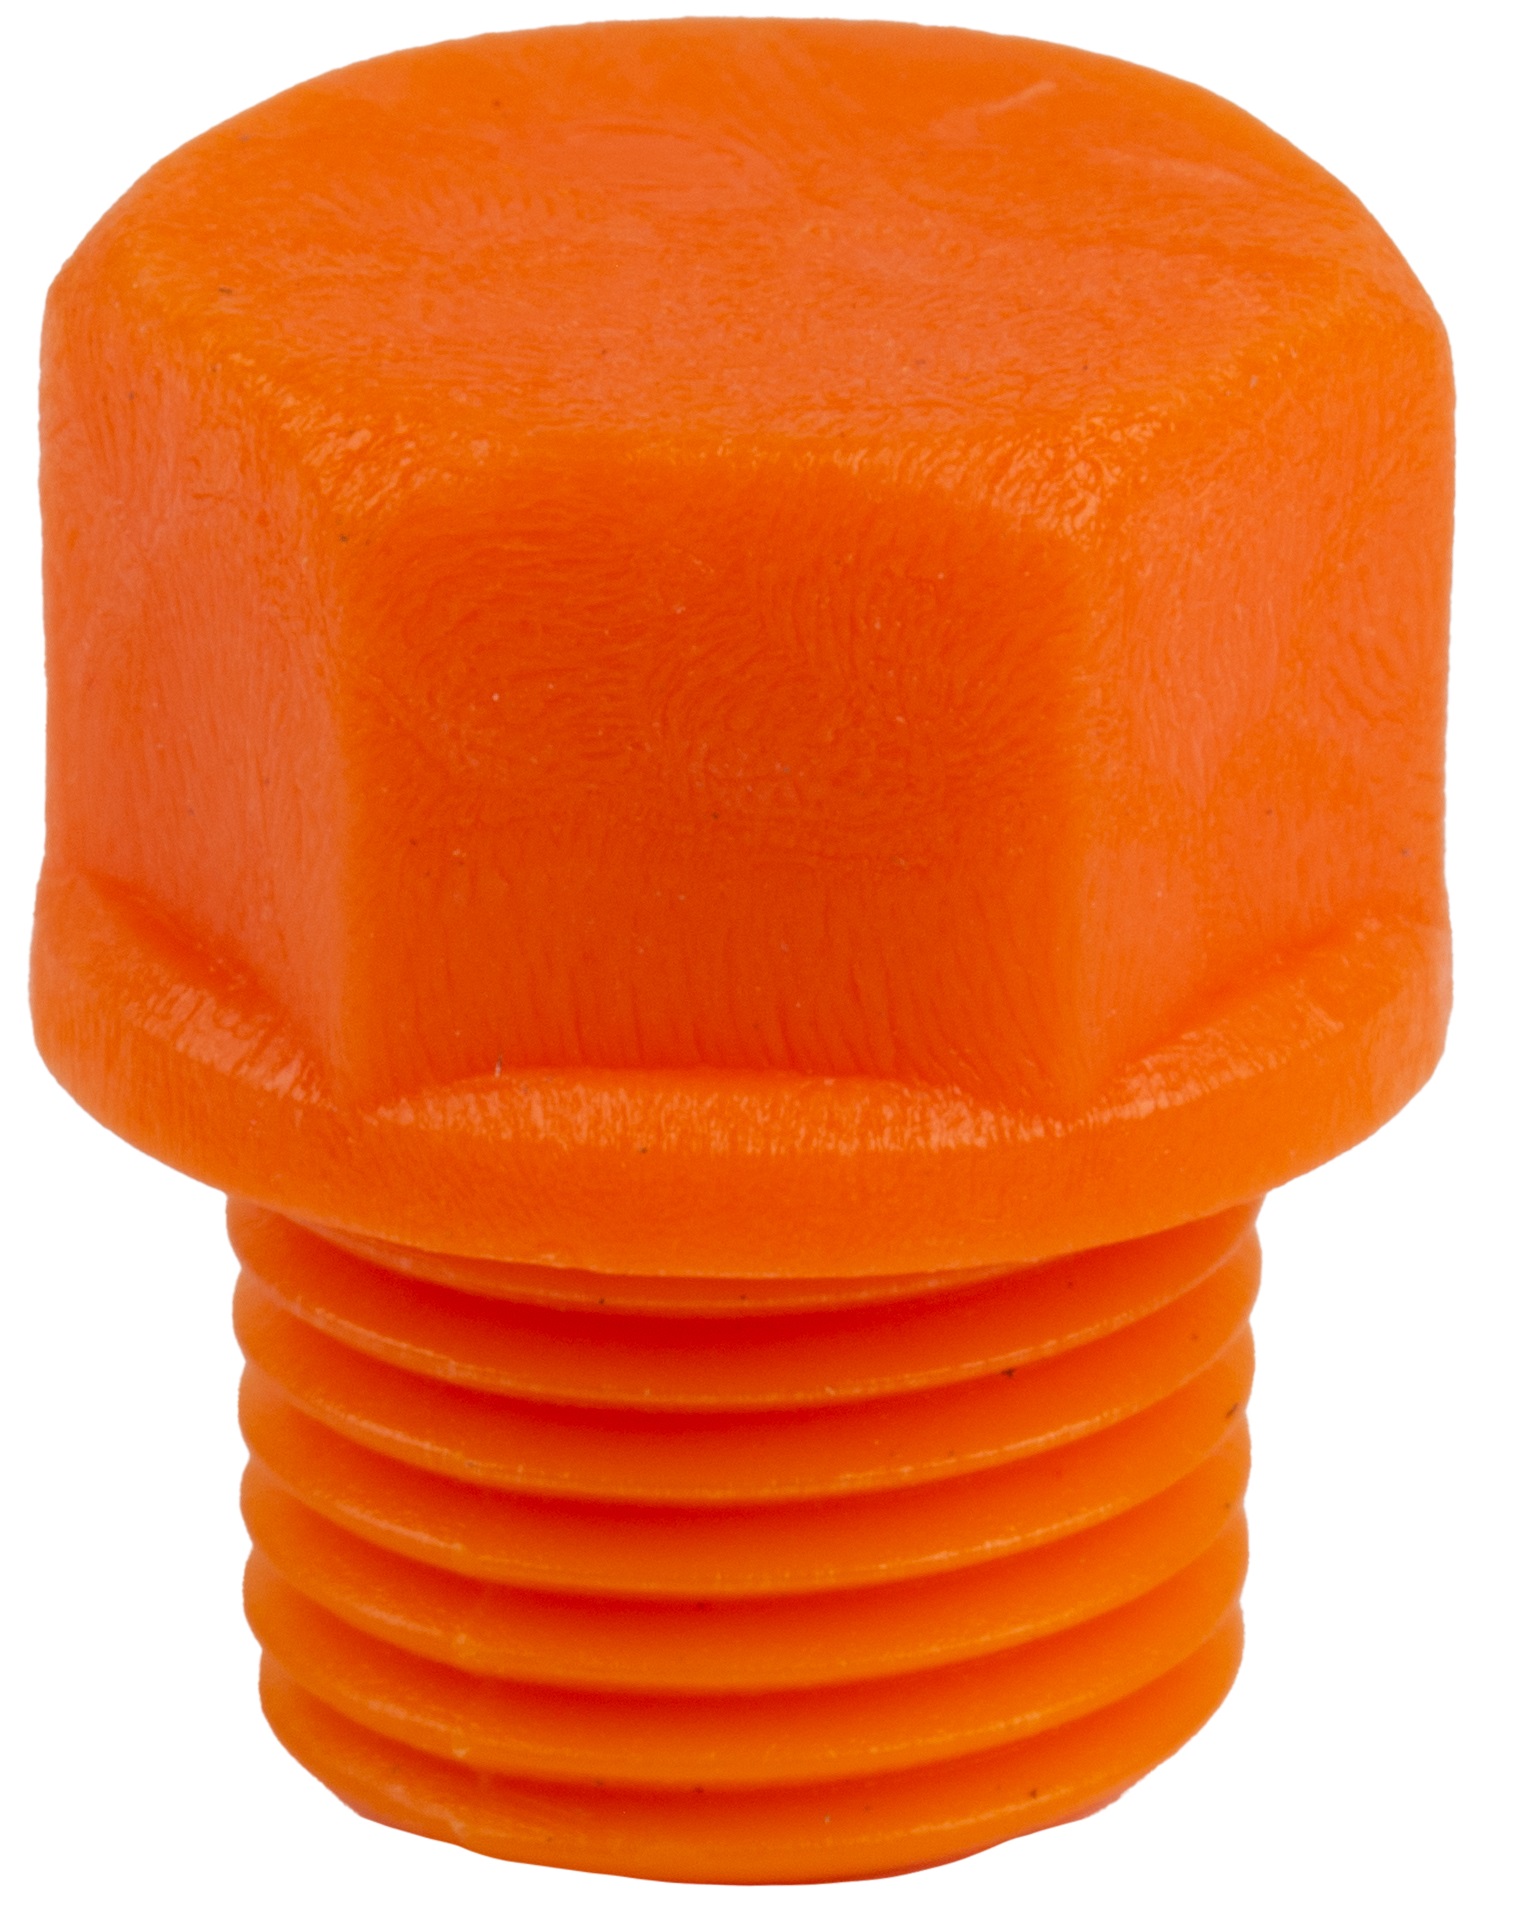 Nylon Plug Used As Replacement For Spreader Nozzle. For Sprinklers At Codes 668001; 668003.